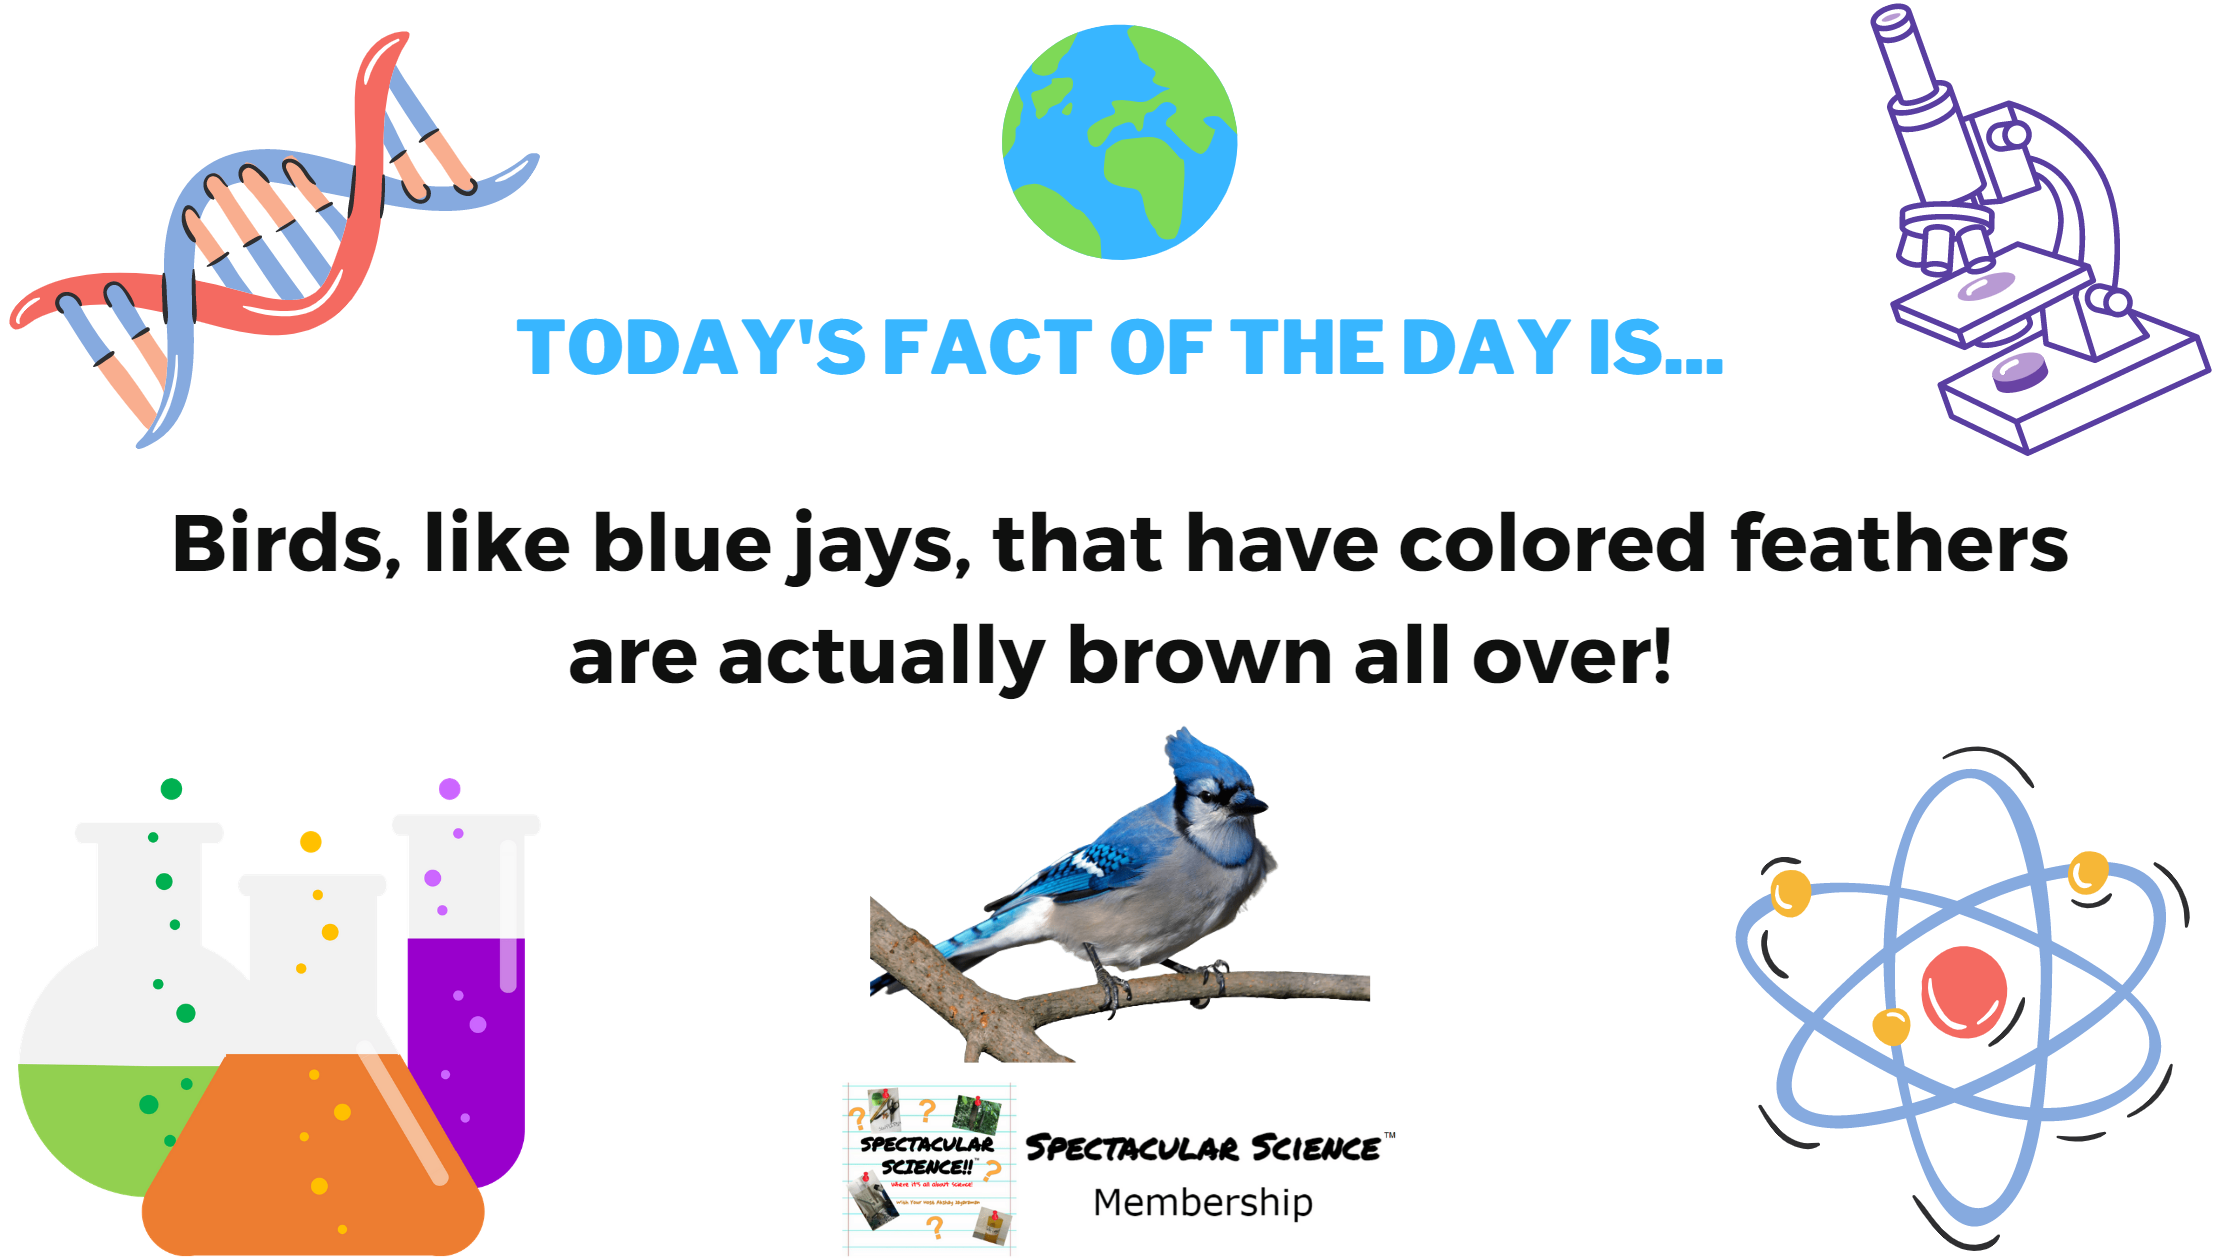 Fact of the Day Image January 28th